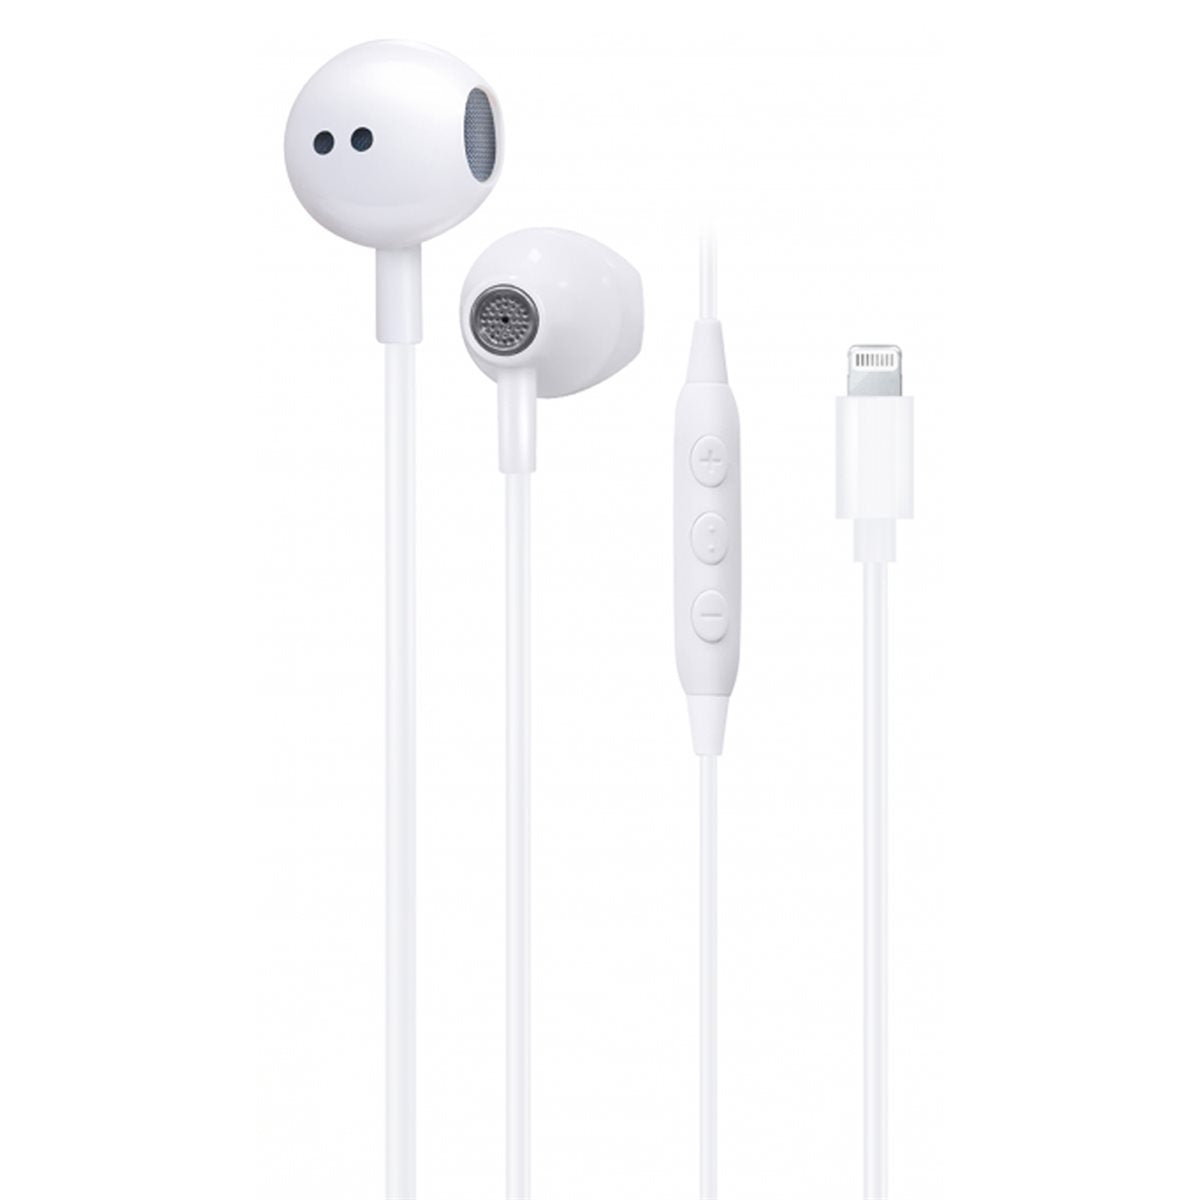 AXS Wired Earphones w/ Lightning Connector - White